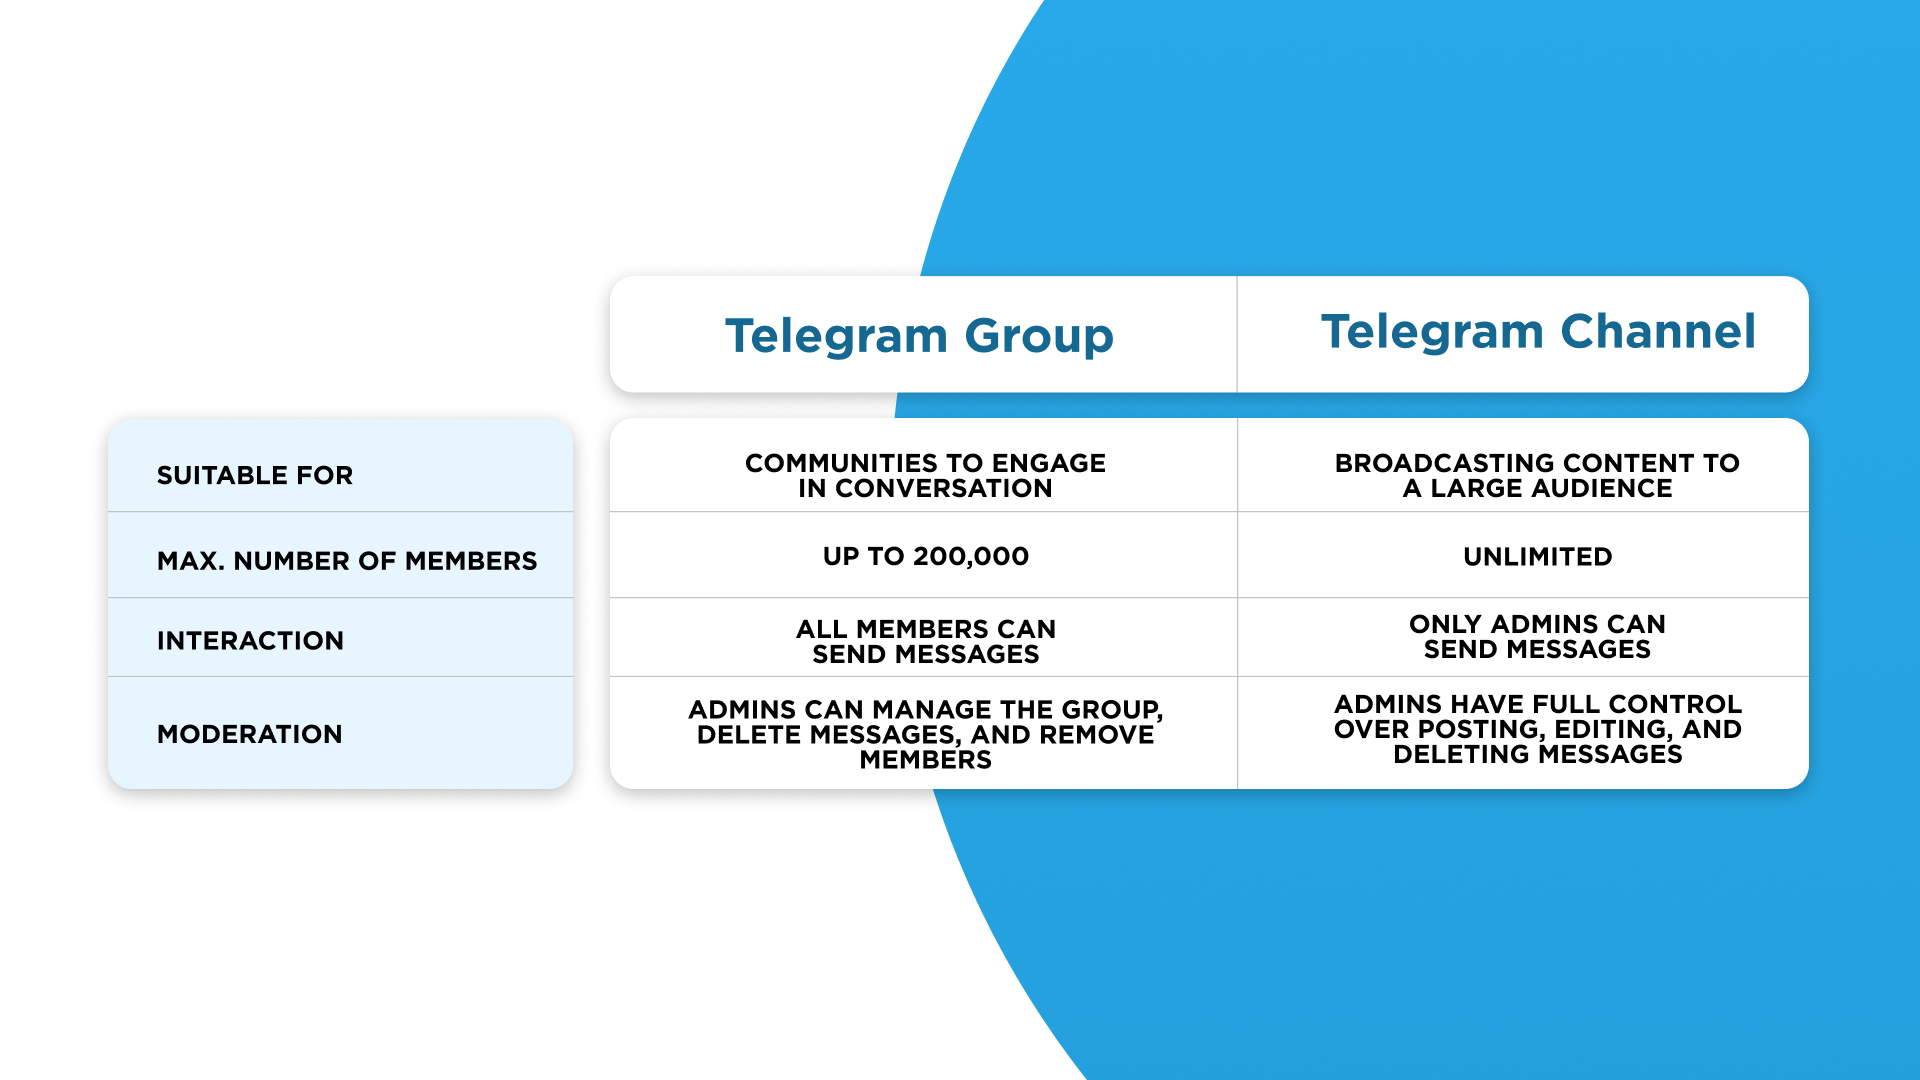 Telegram Groups and Channels difference